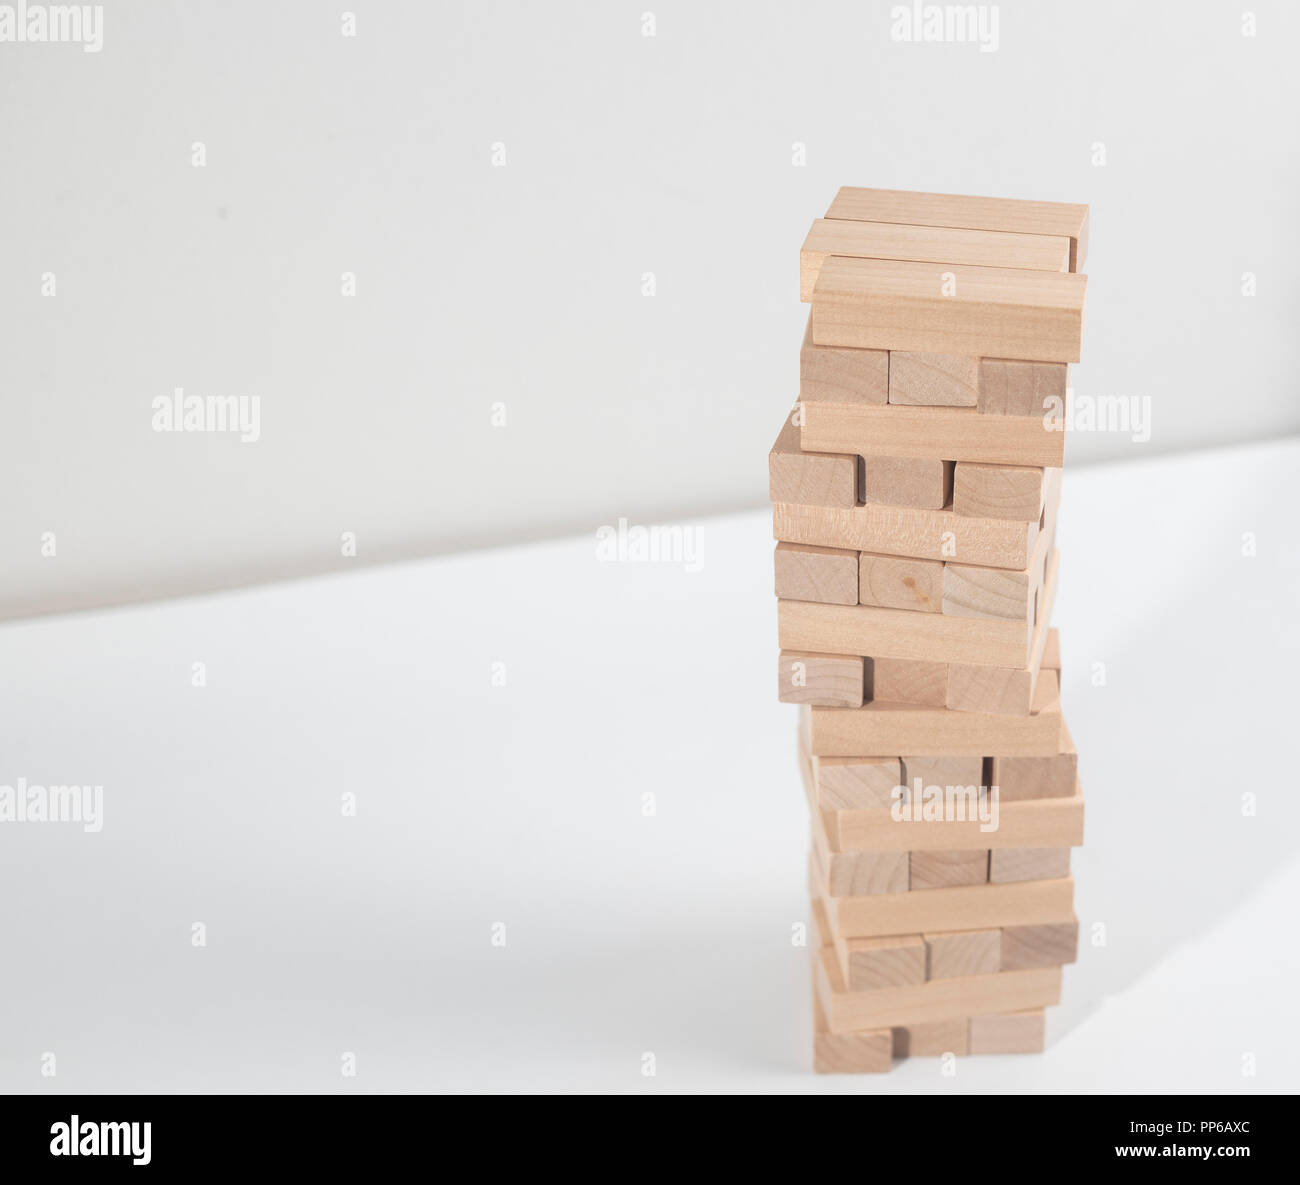 Jenga tower collapses on the white background on the table Stock Photo